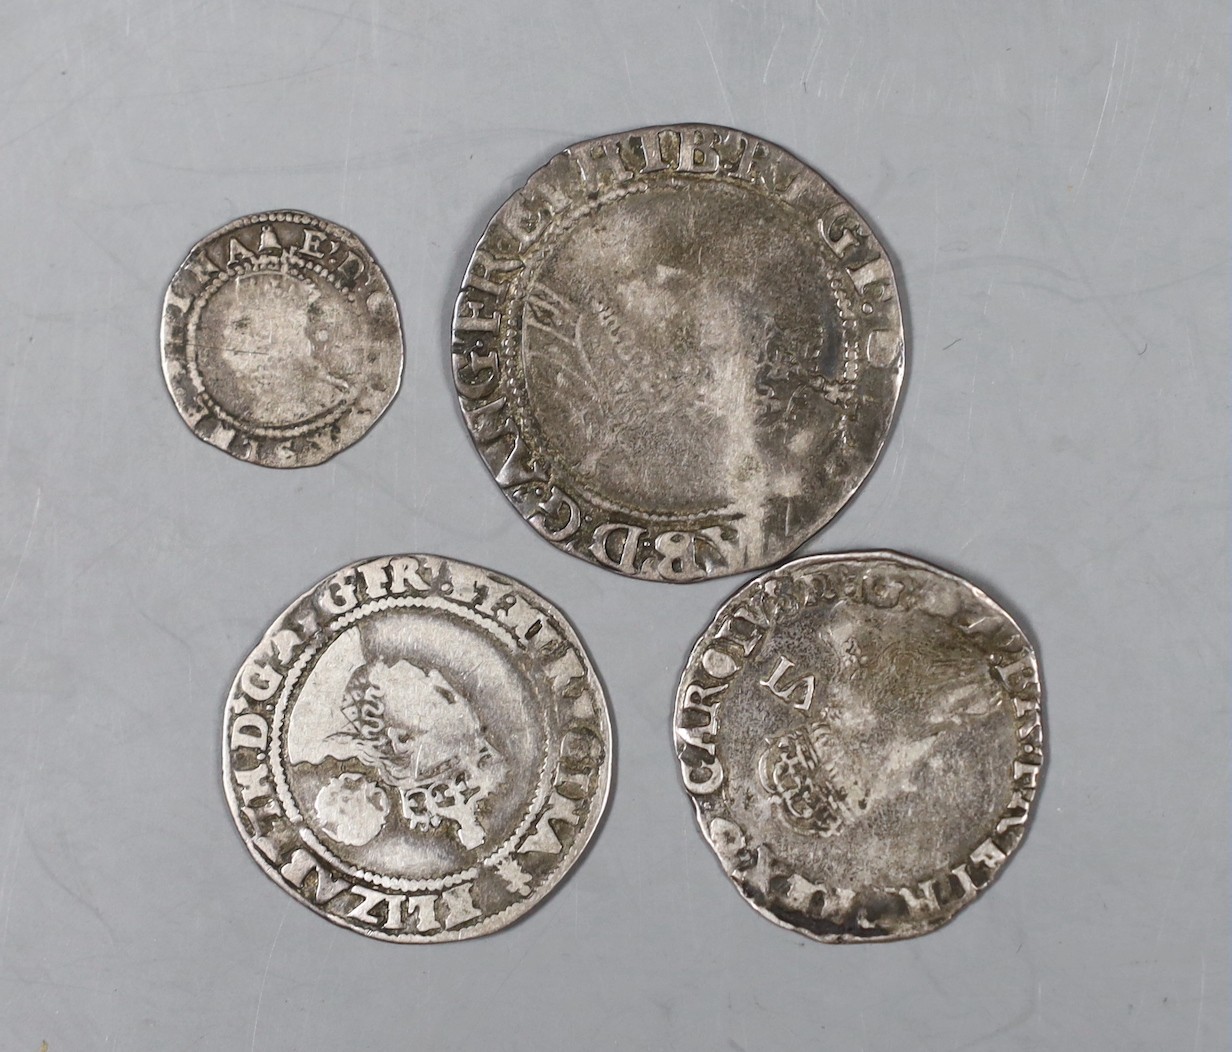 British coins, Elizabeth I shilling, sixpence and threepence and a James I shilling.